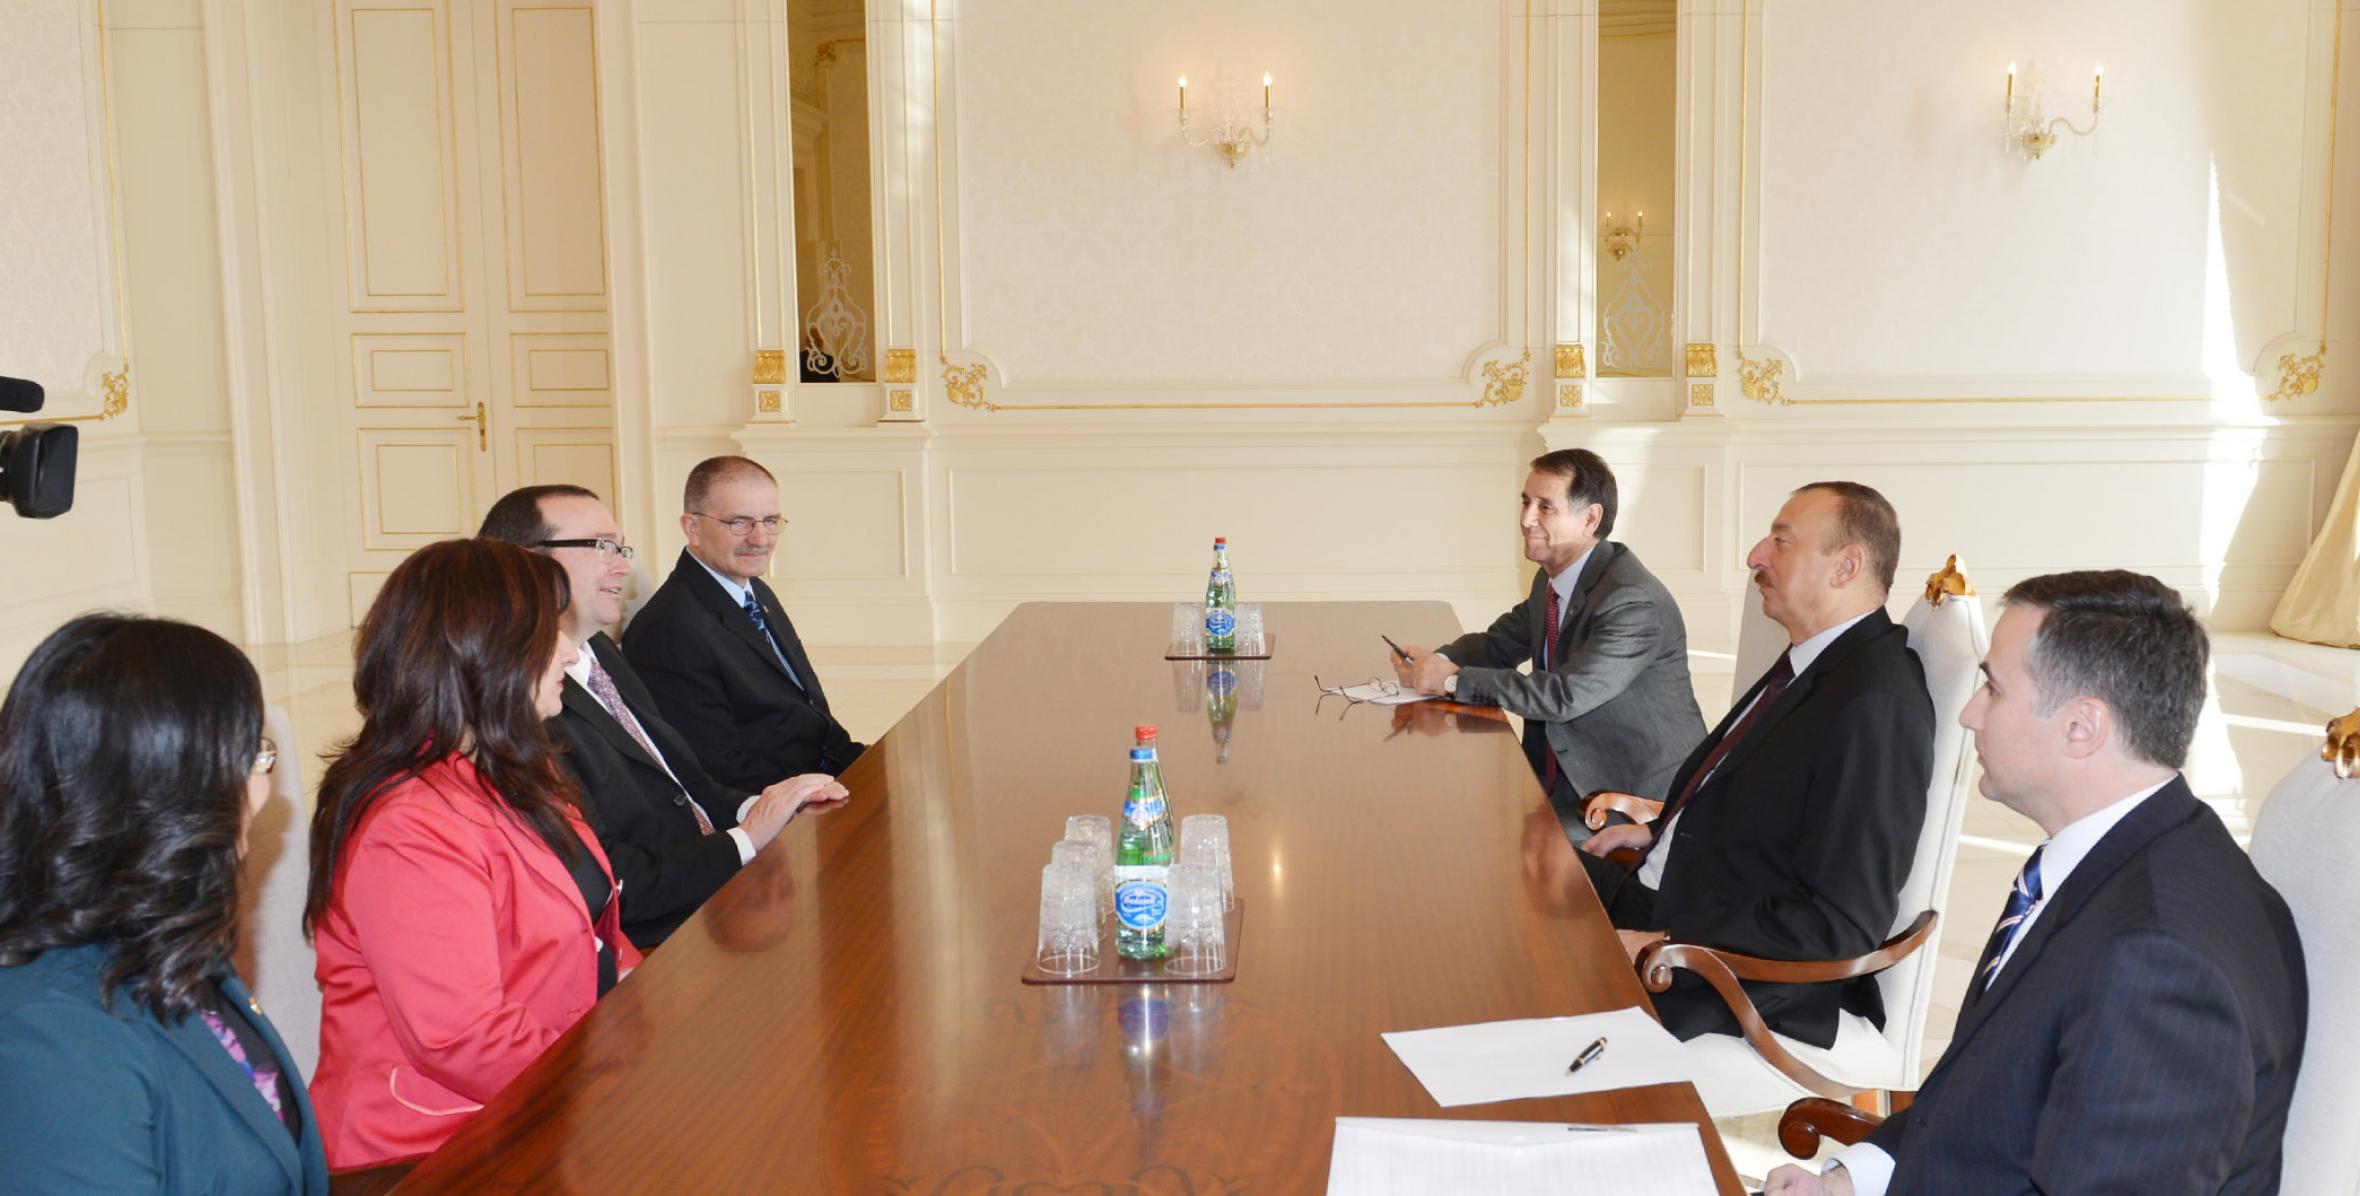 Ilham Aliyev received a delegation led by the Deputy Speaker of the House of Commons of Canada and Chair of the Canada-Azerbaijan Friendship Group